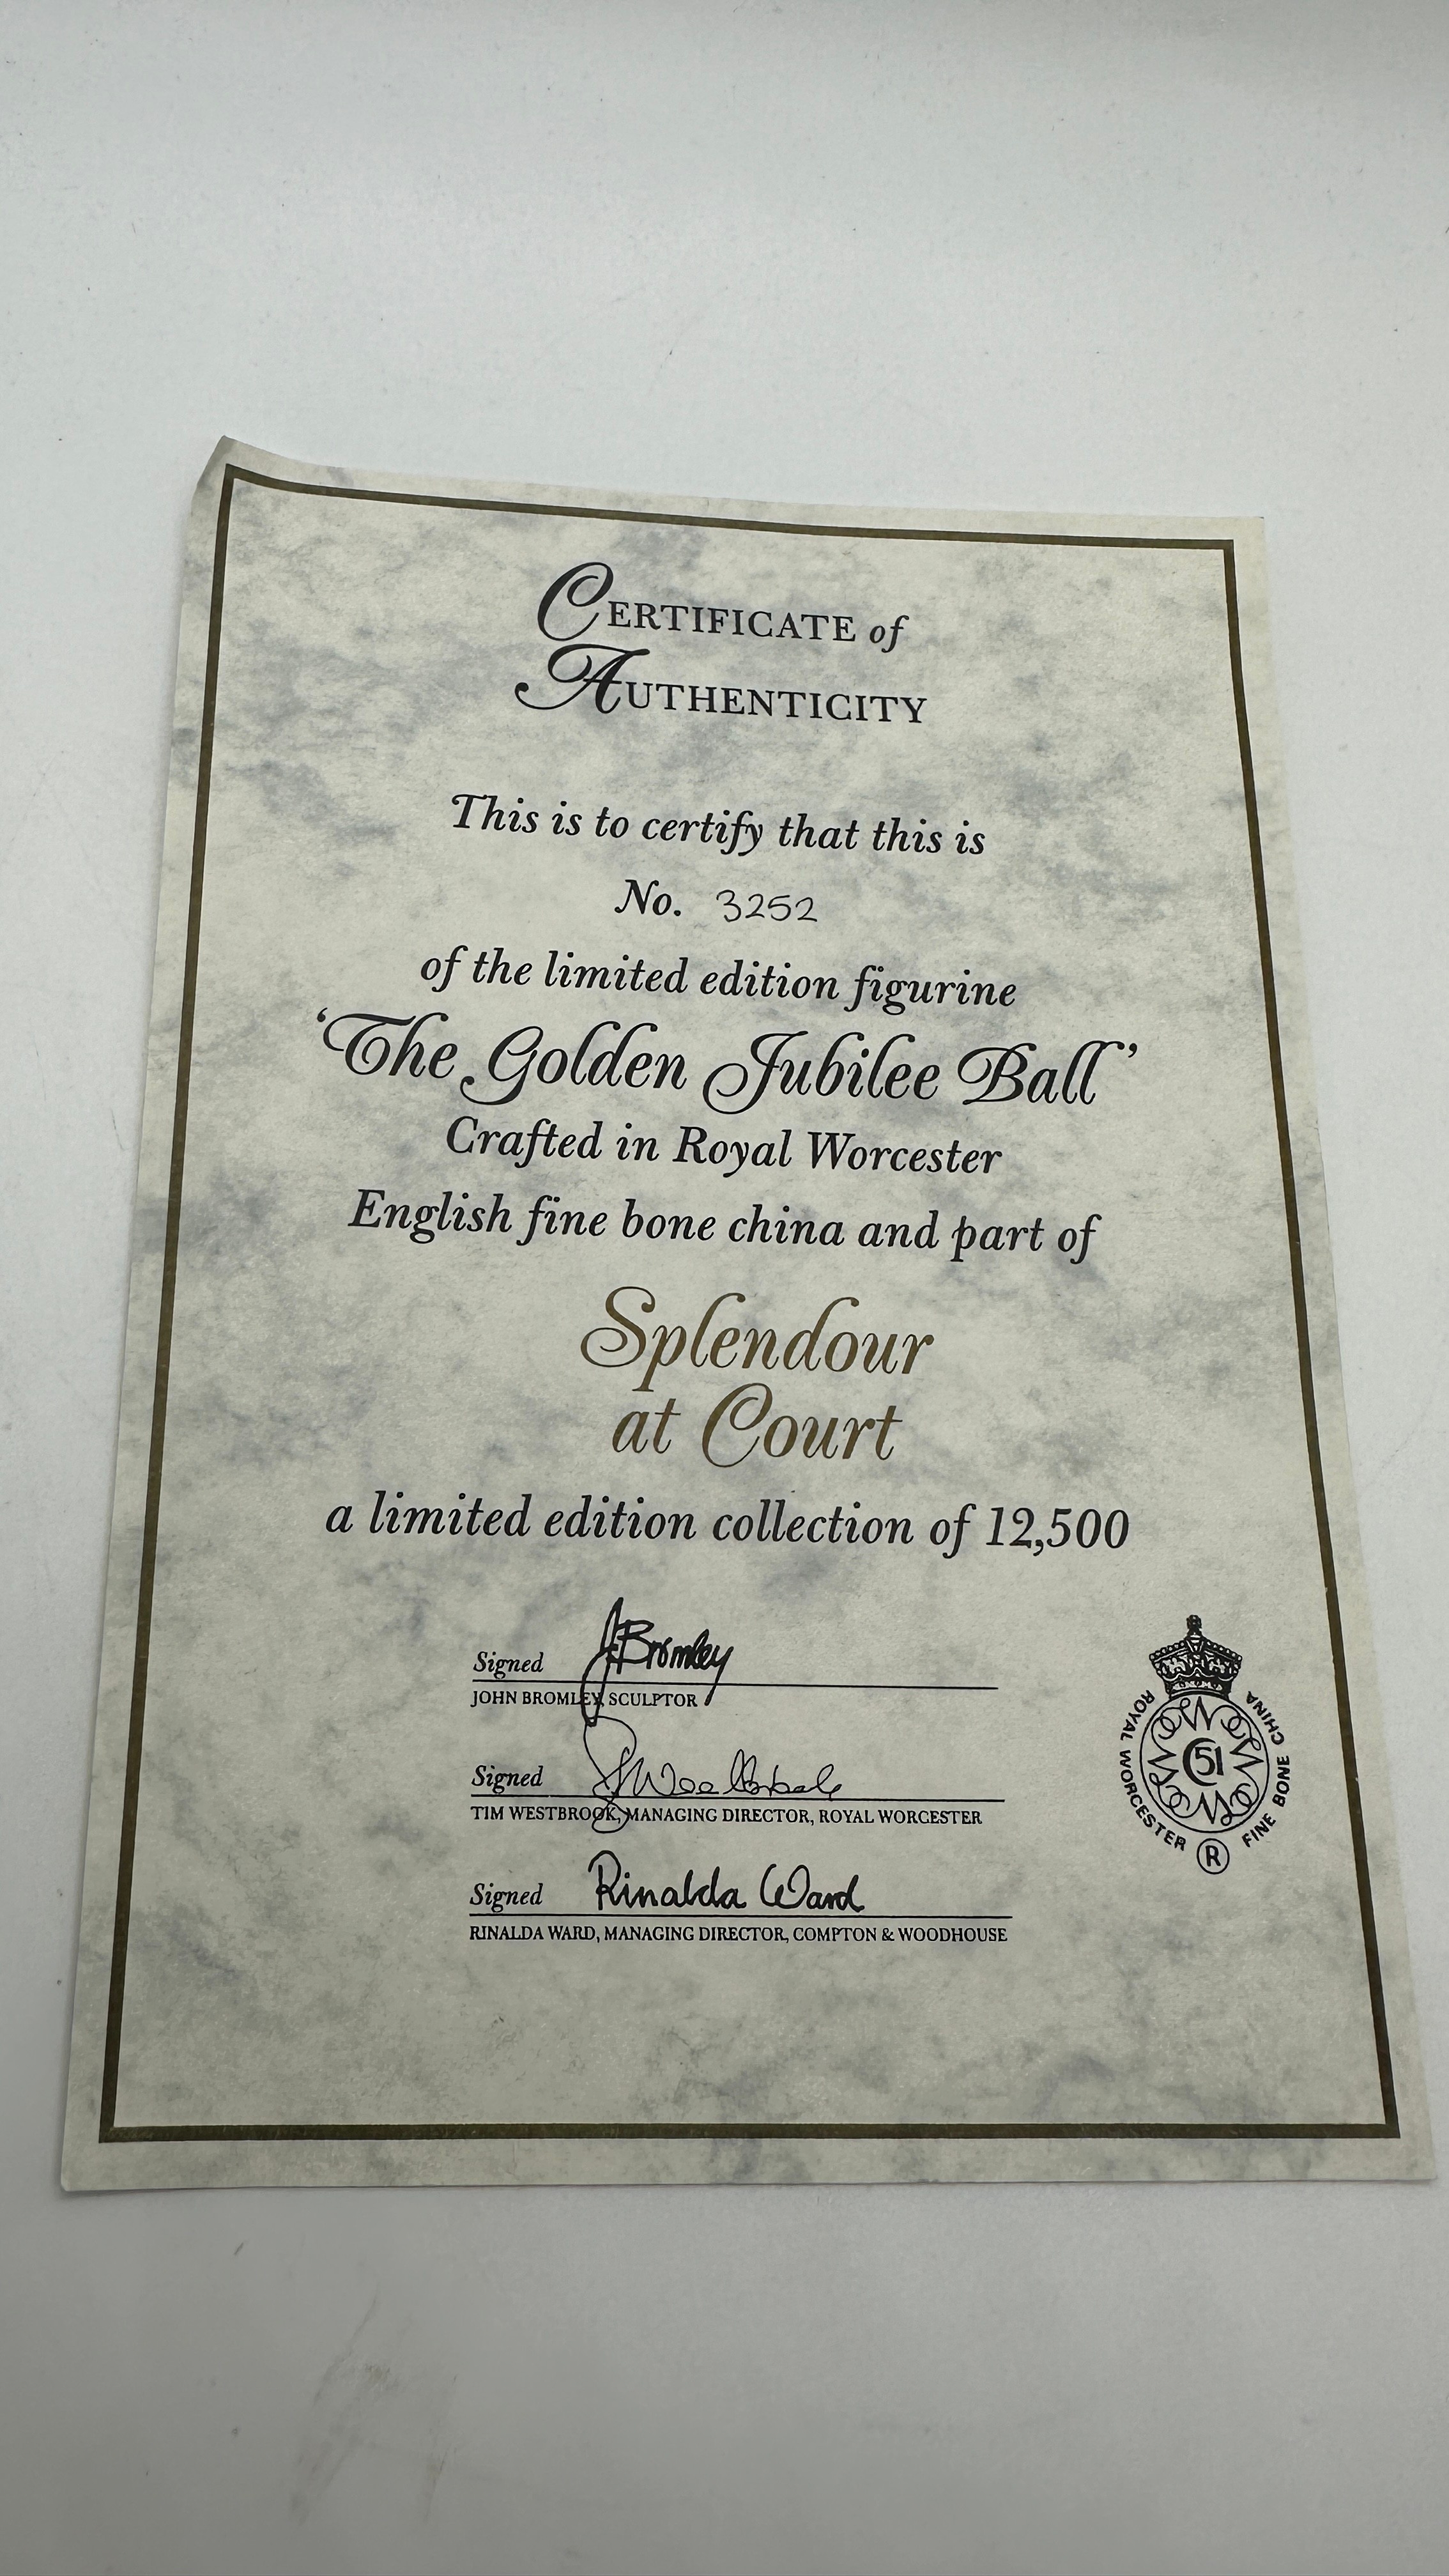 Royal Worcester Figurine The Golden Jubilee Ball Limited edition Splendour at Court with COA - Image 4 of 4